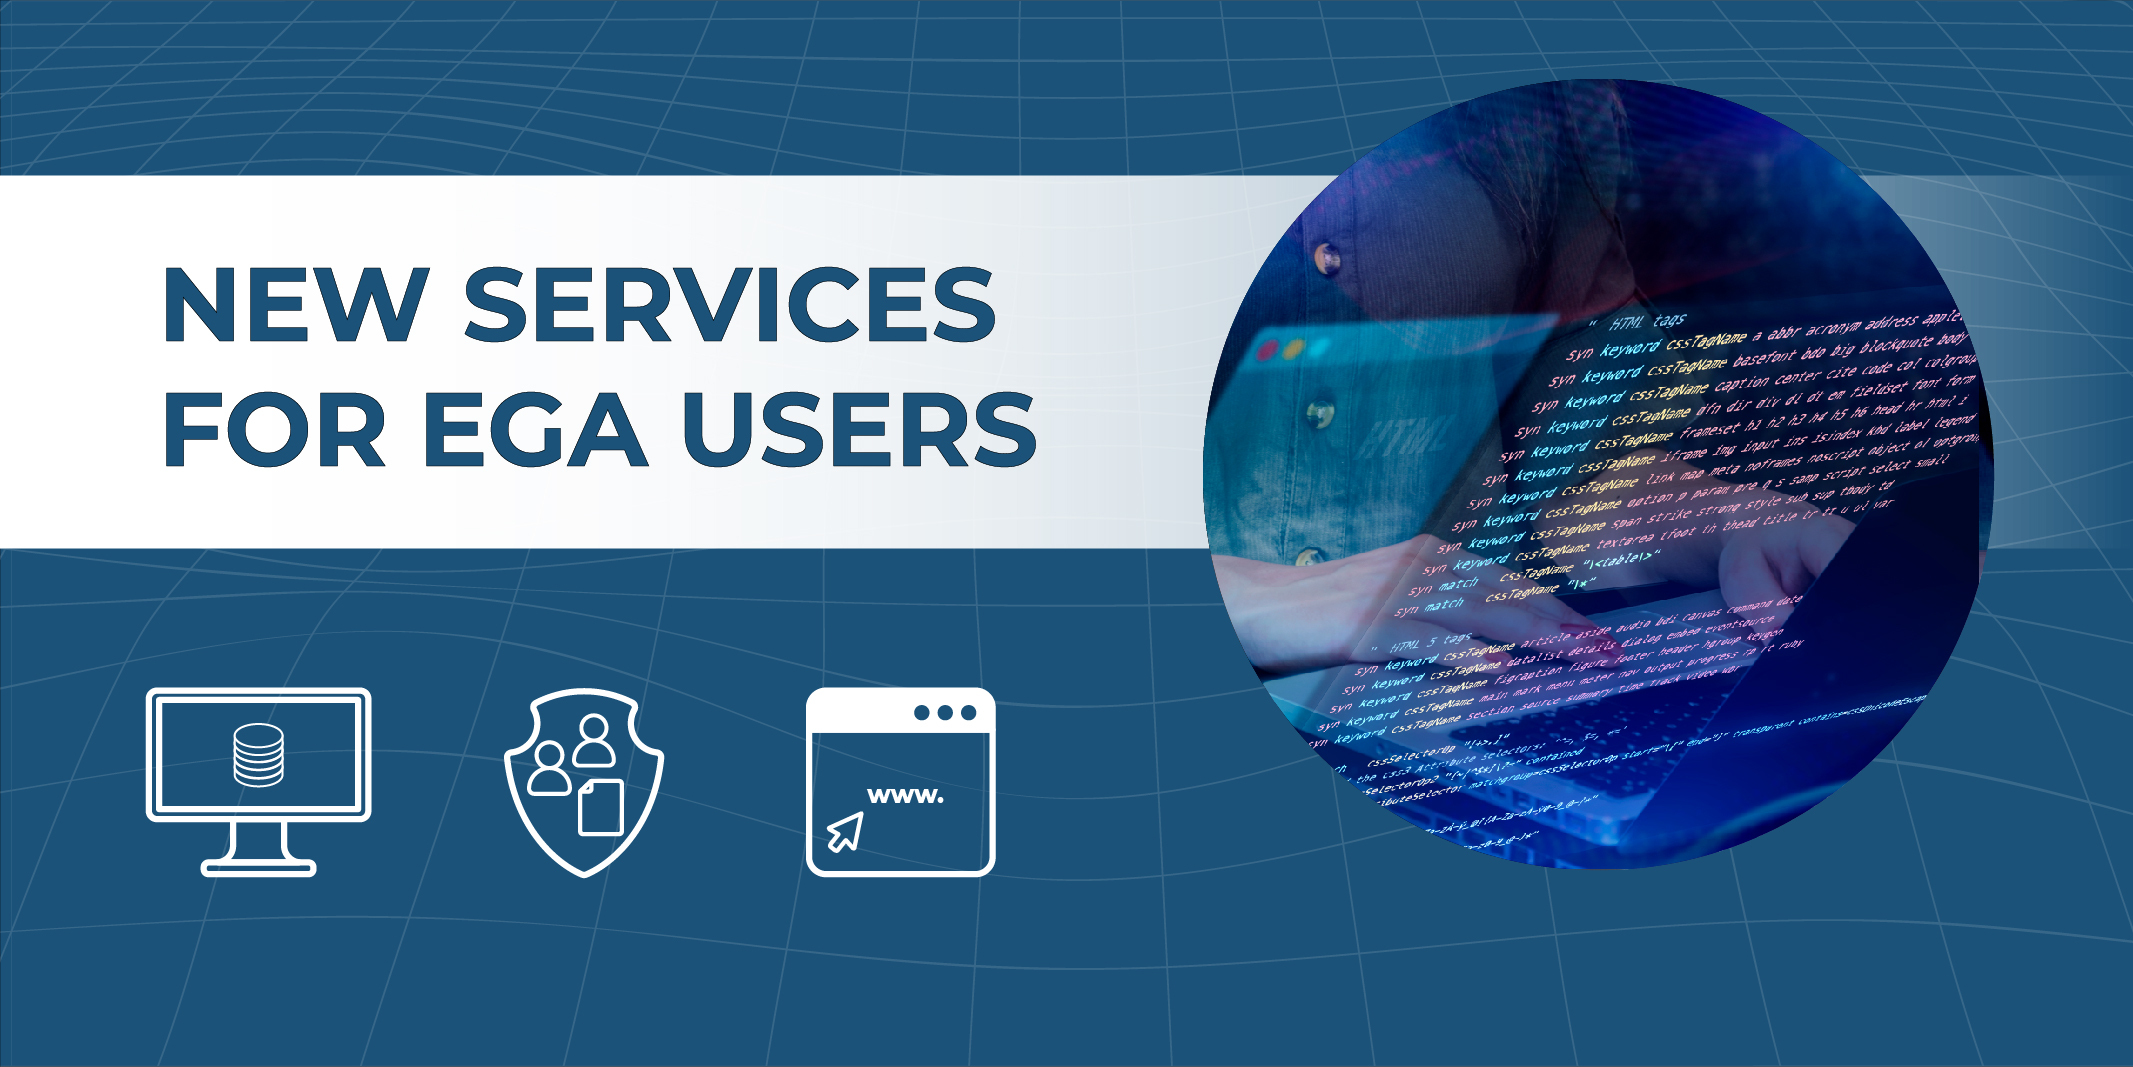 New set of services for all users unveiled at the EGA  thumbnail